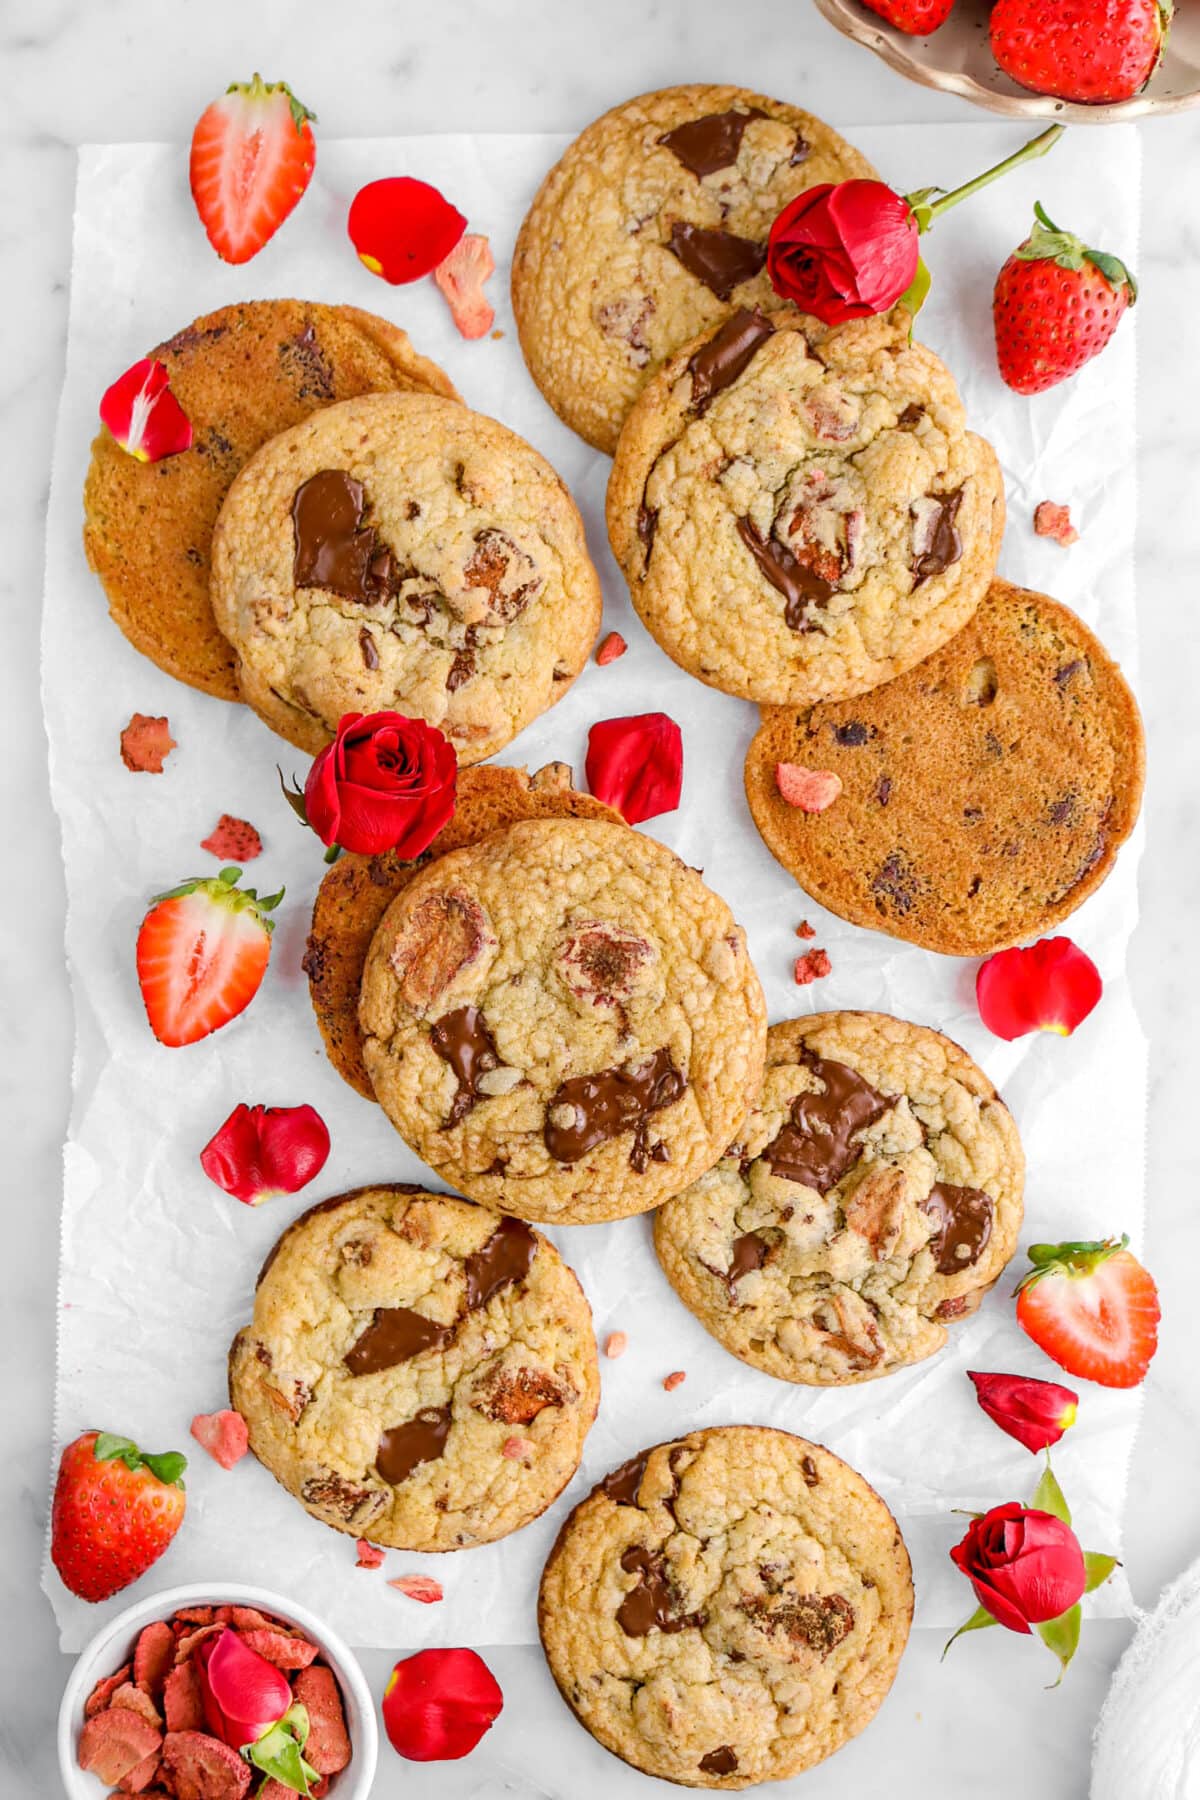 ten chocolate chip strawberry cookies on parchment paper with strawberries, roses, and rose petals around on marble surface with white bowl of freeze dried strawberries beside.